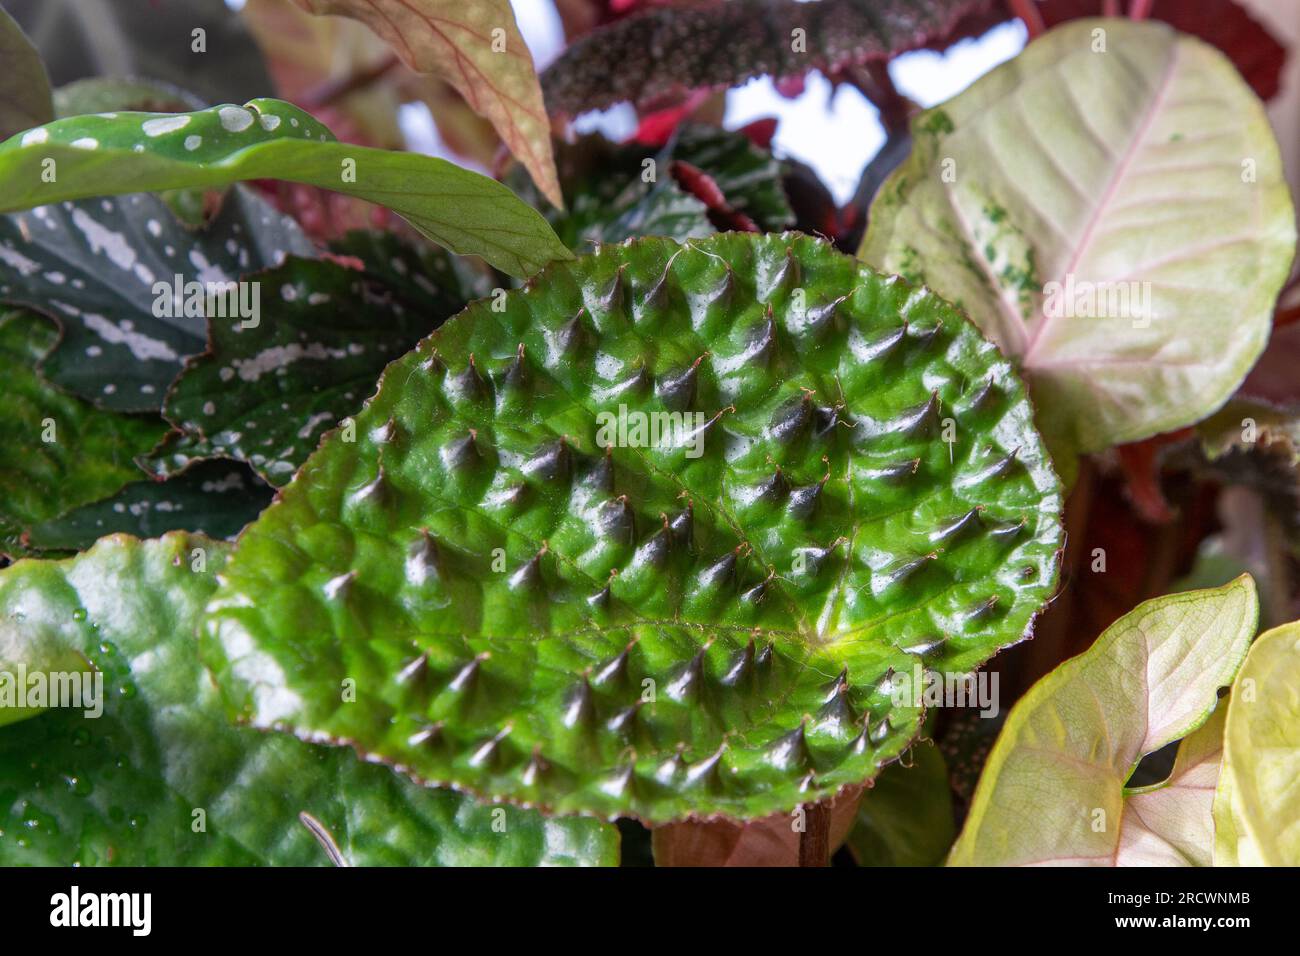 Flower leaf of Begonia Melanobulata. Green decorative indoor flowers. Leaf with thorns. New rare species. Texture. Natural background. Stock Photo